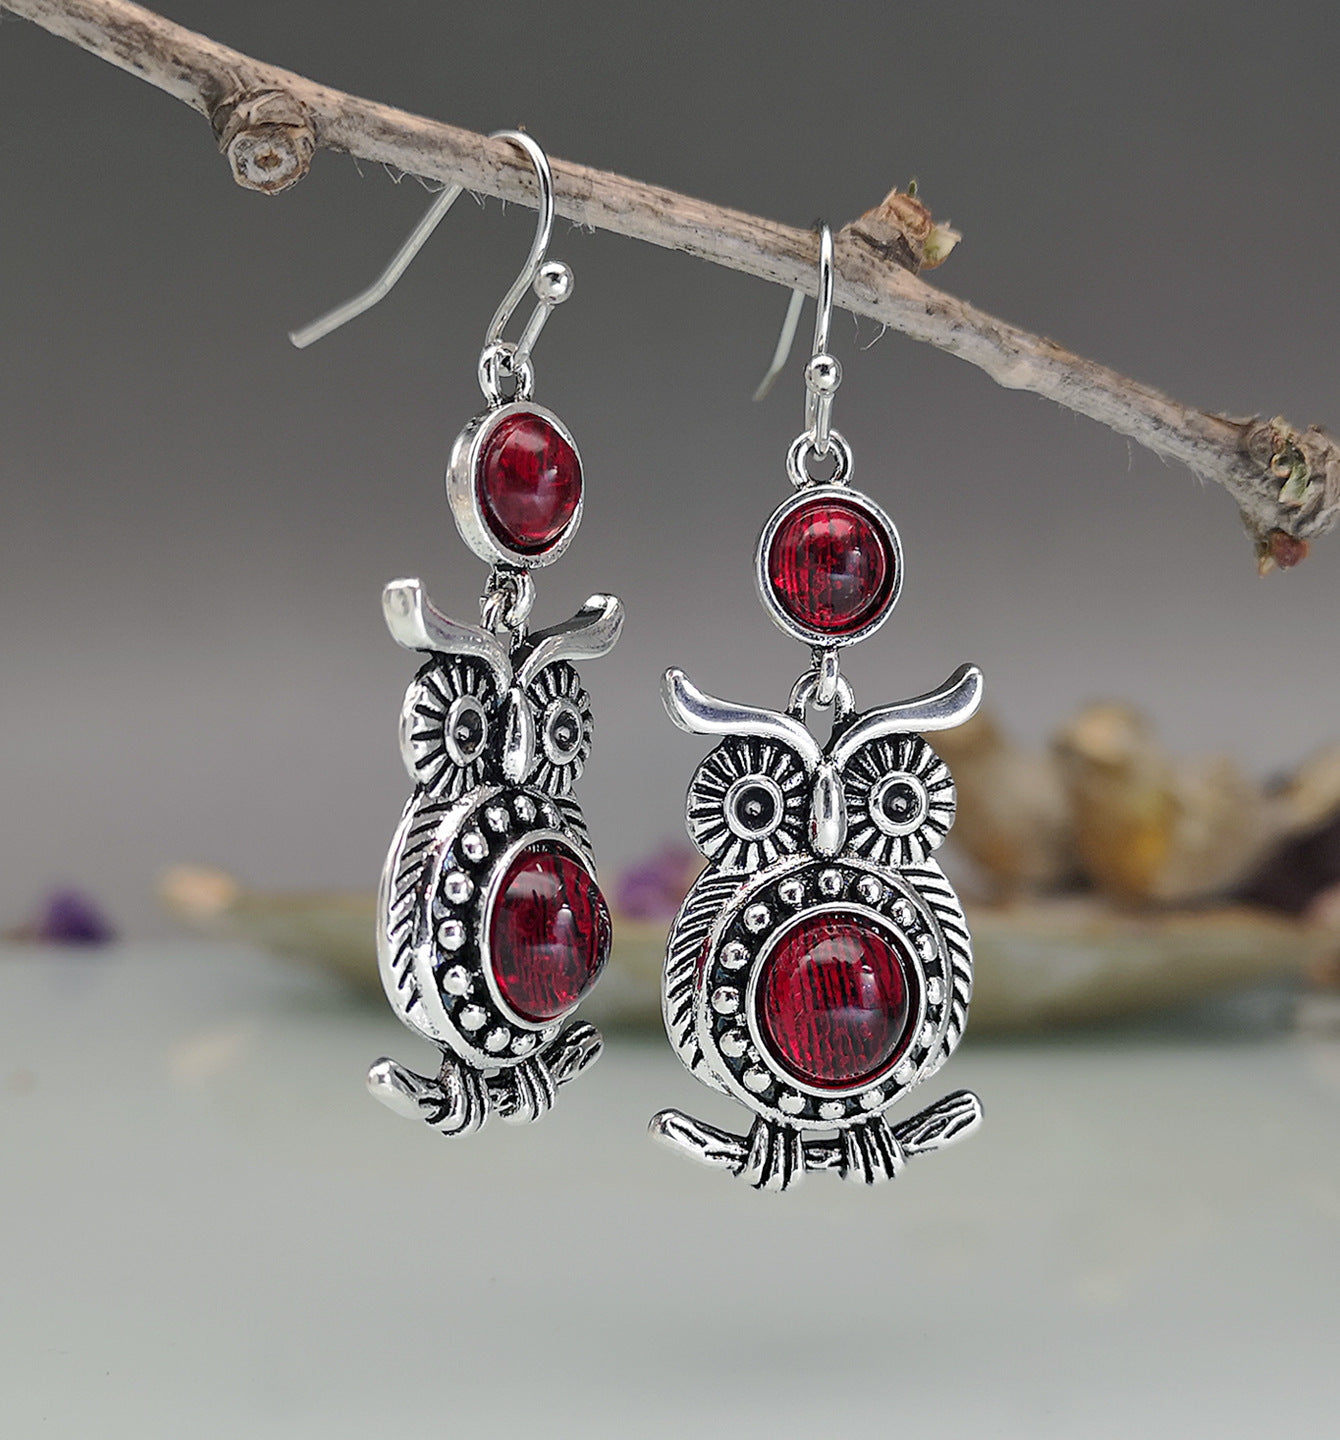 New lace ruby and owl earrings-canovaniajewelry